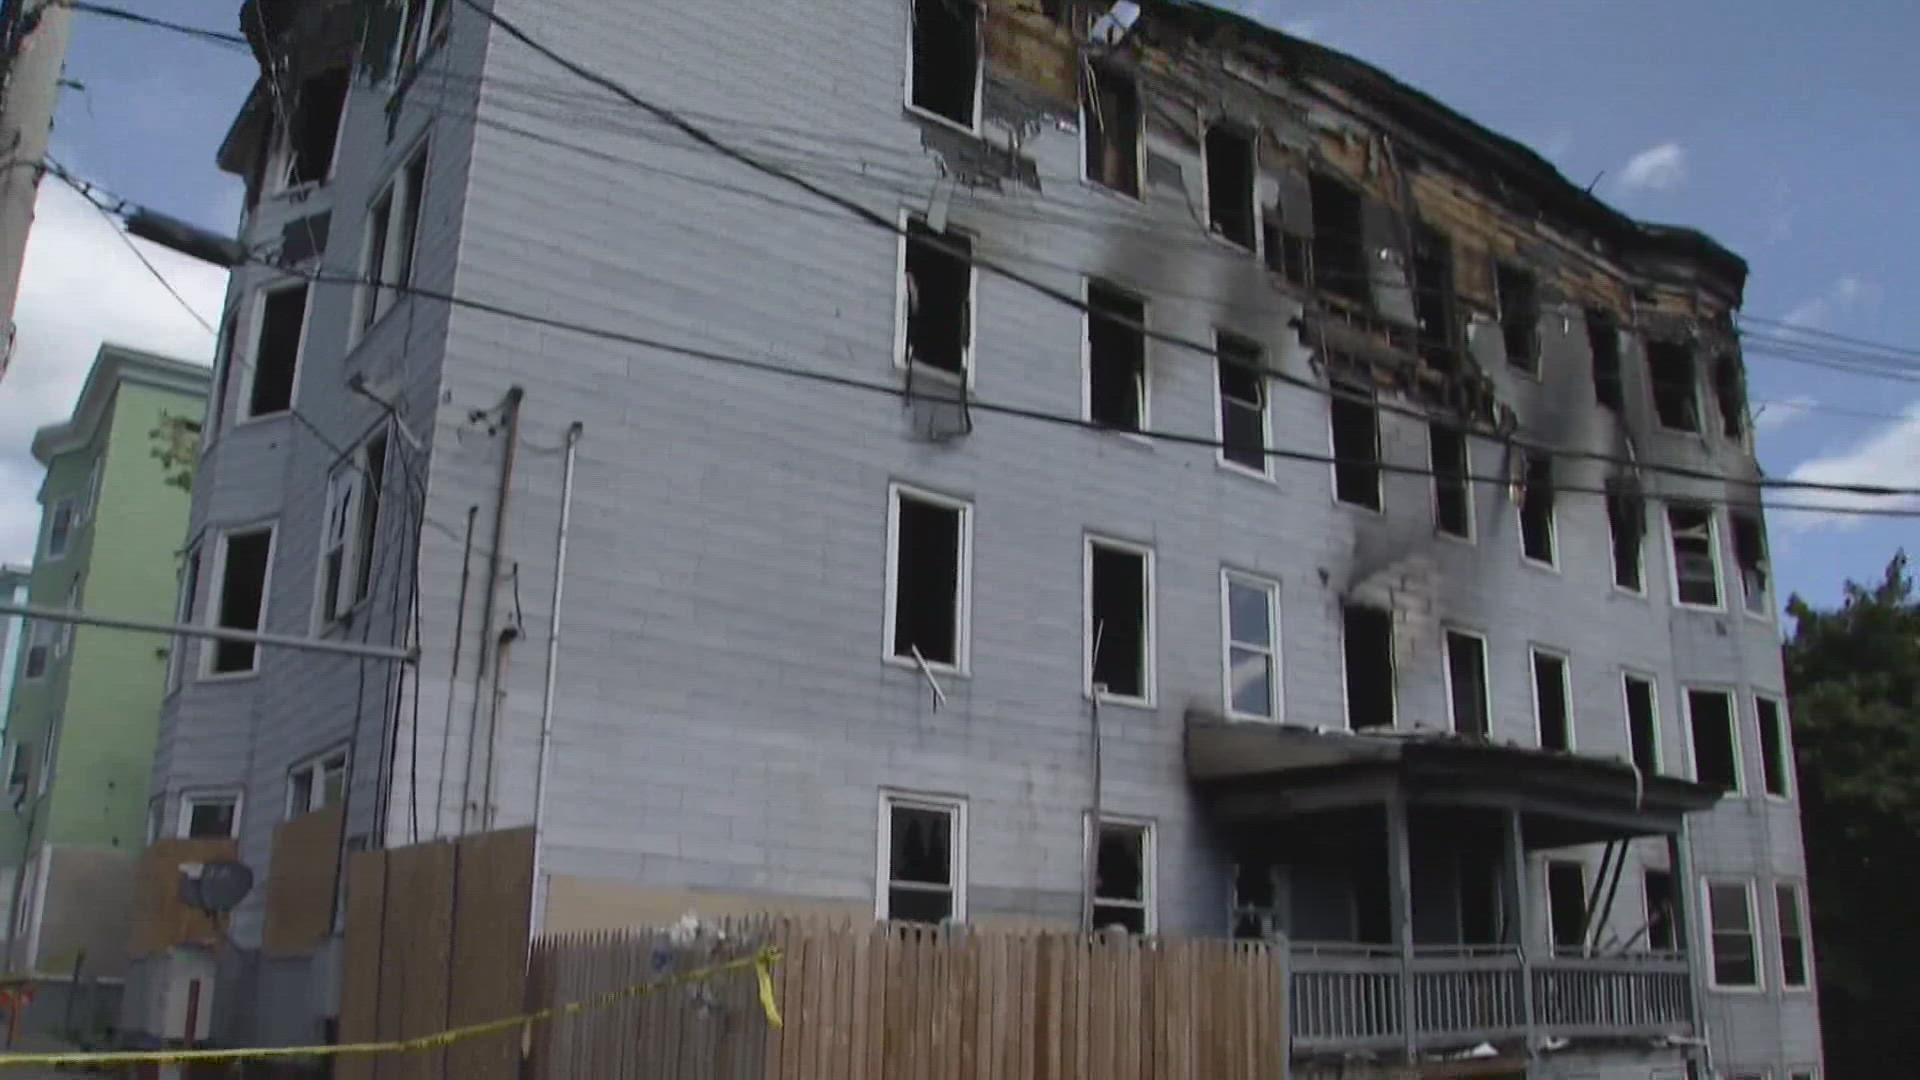 Three juveniles have been arrested and charged with arson in an apartment building fire in Lewiston.